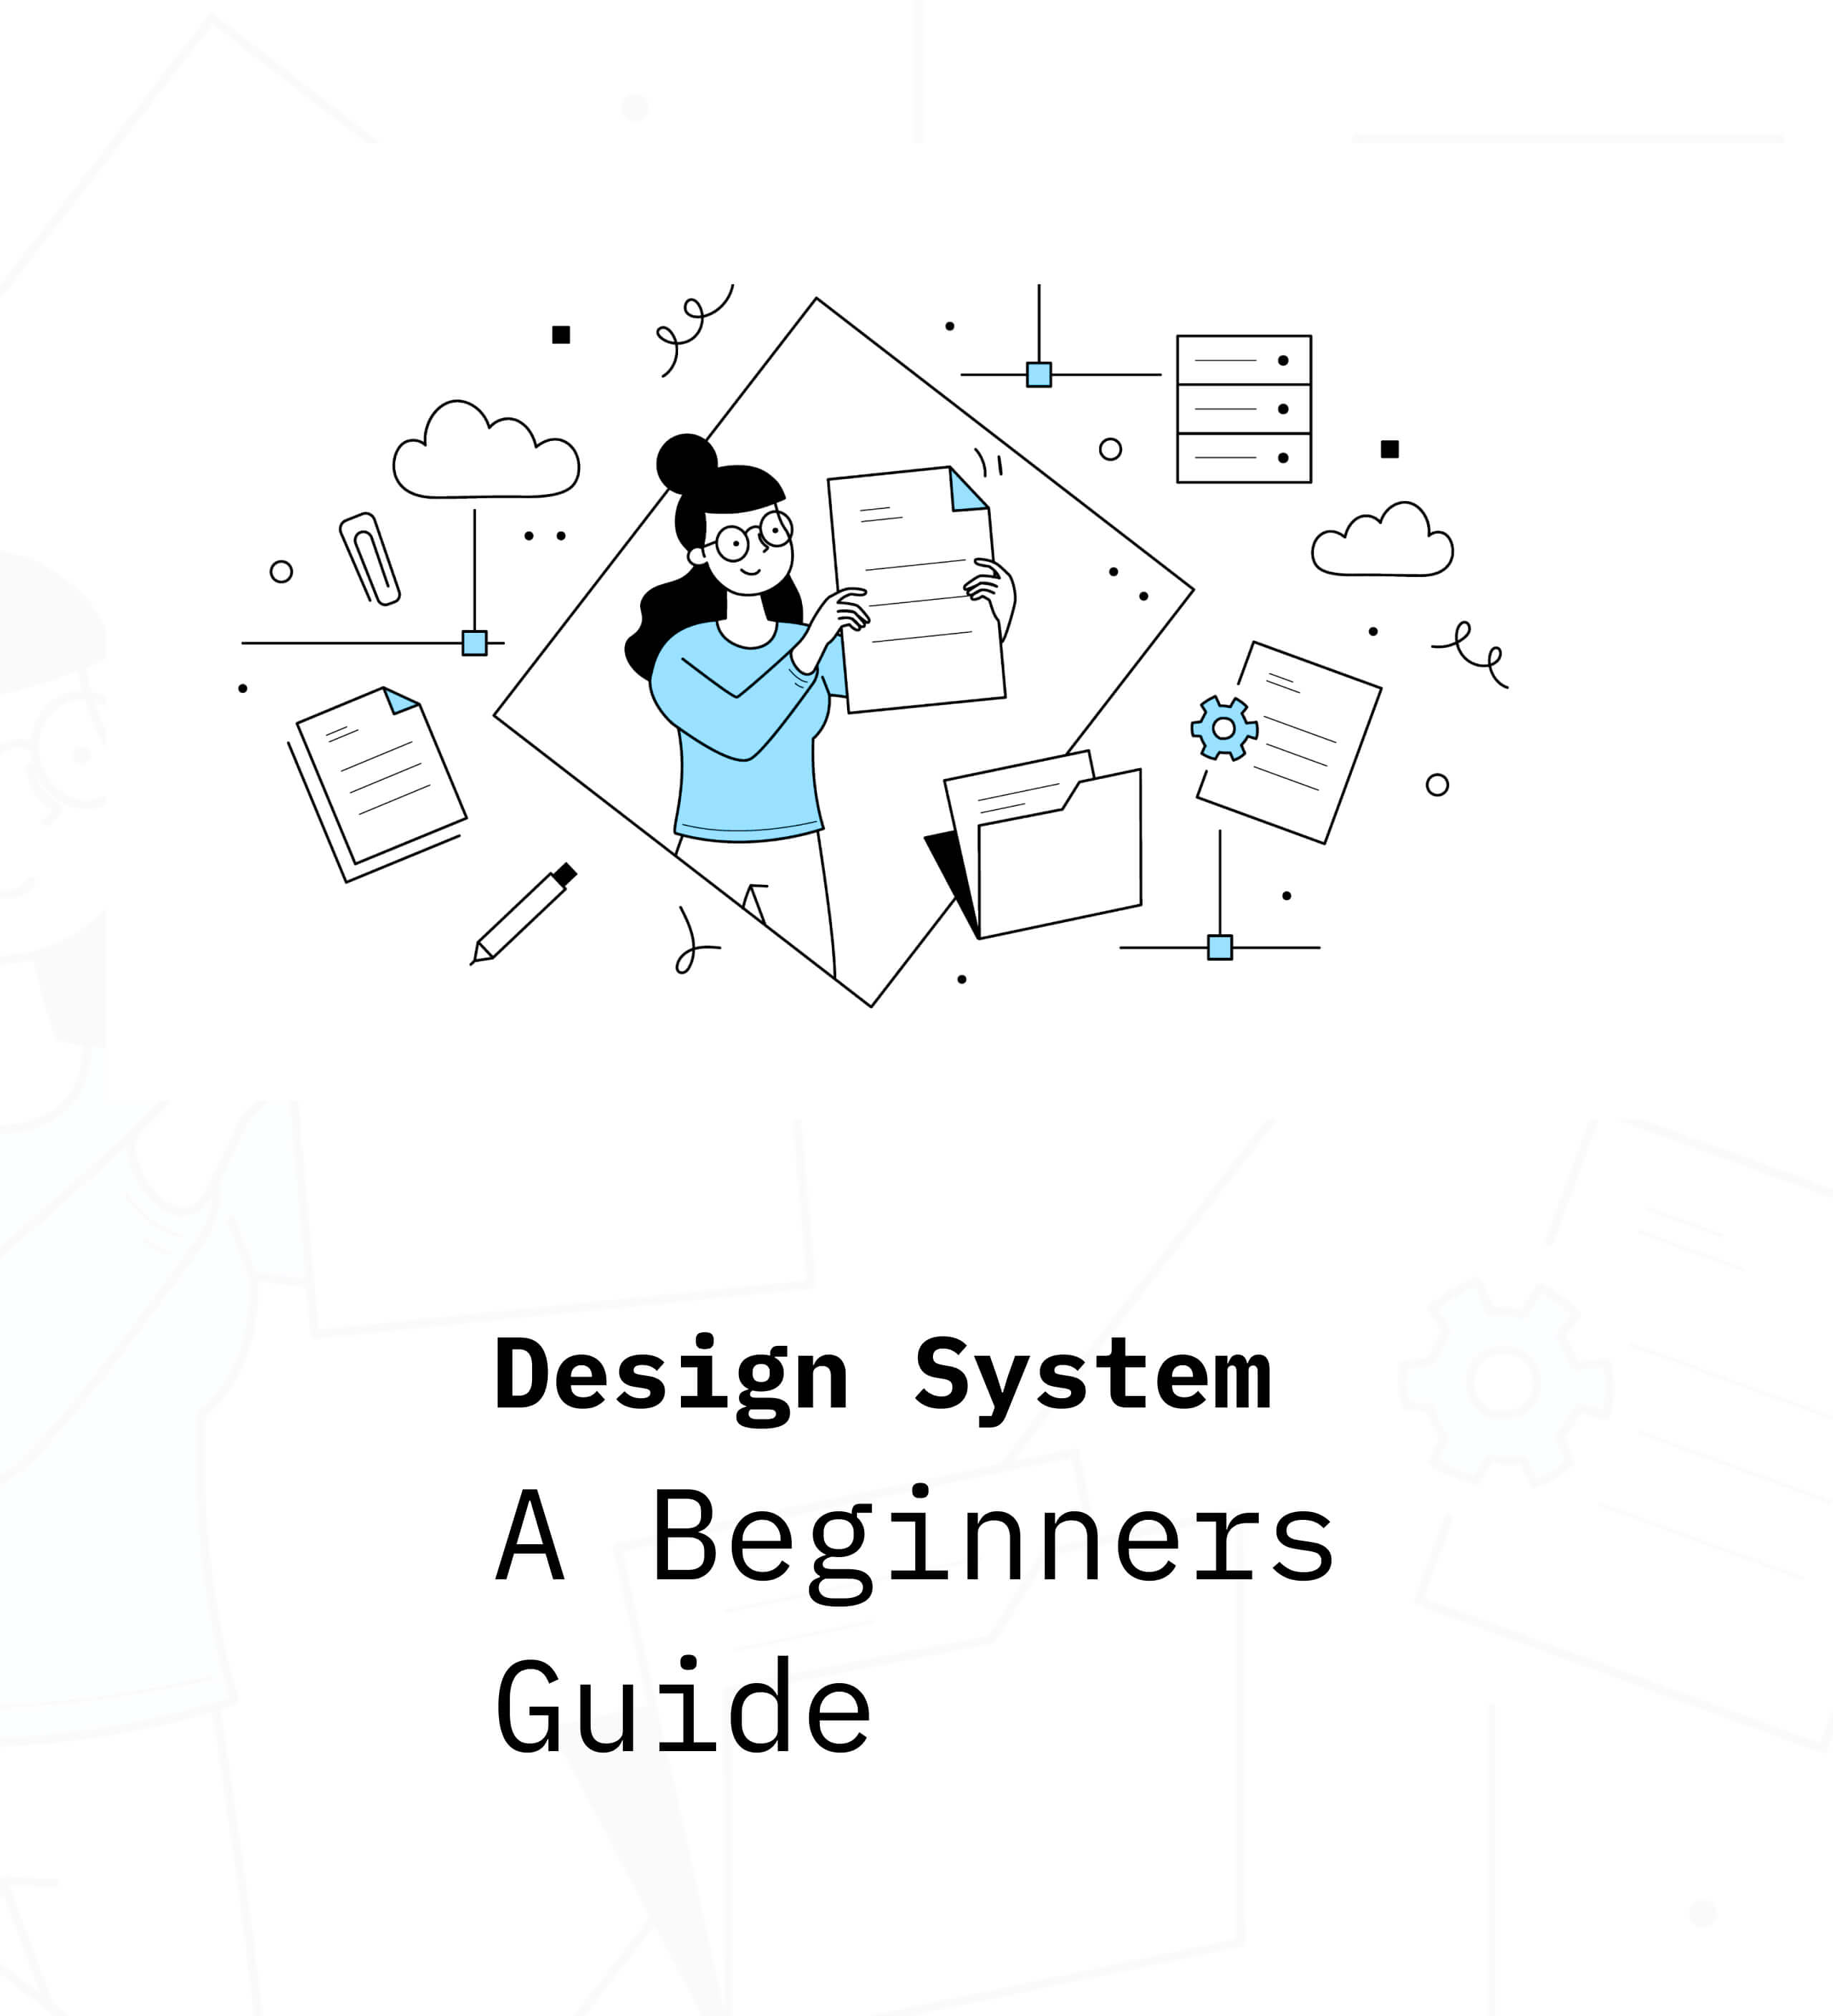 Design System - A Beginners Guide